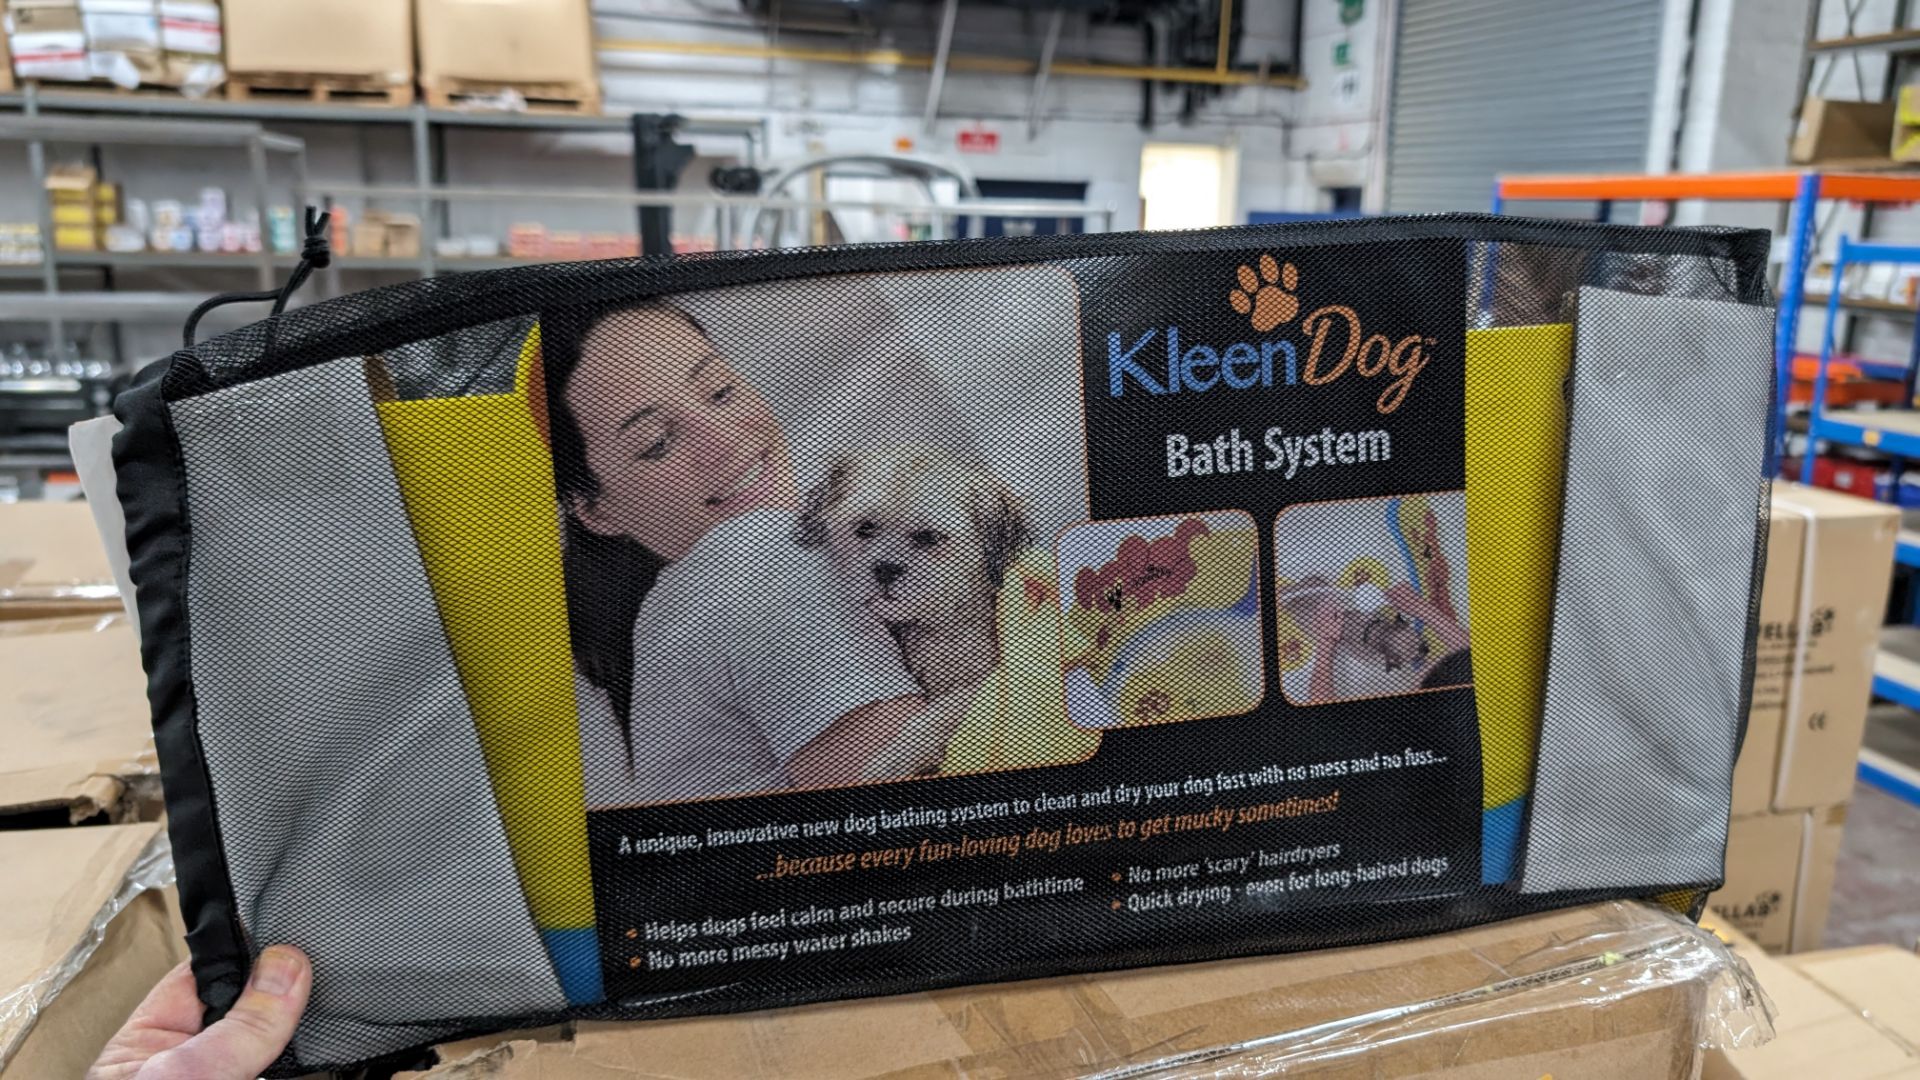 48 off Kleen Dog bath systems - 6 cartons - Image 3 of 6